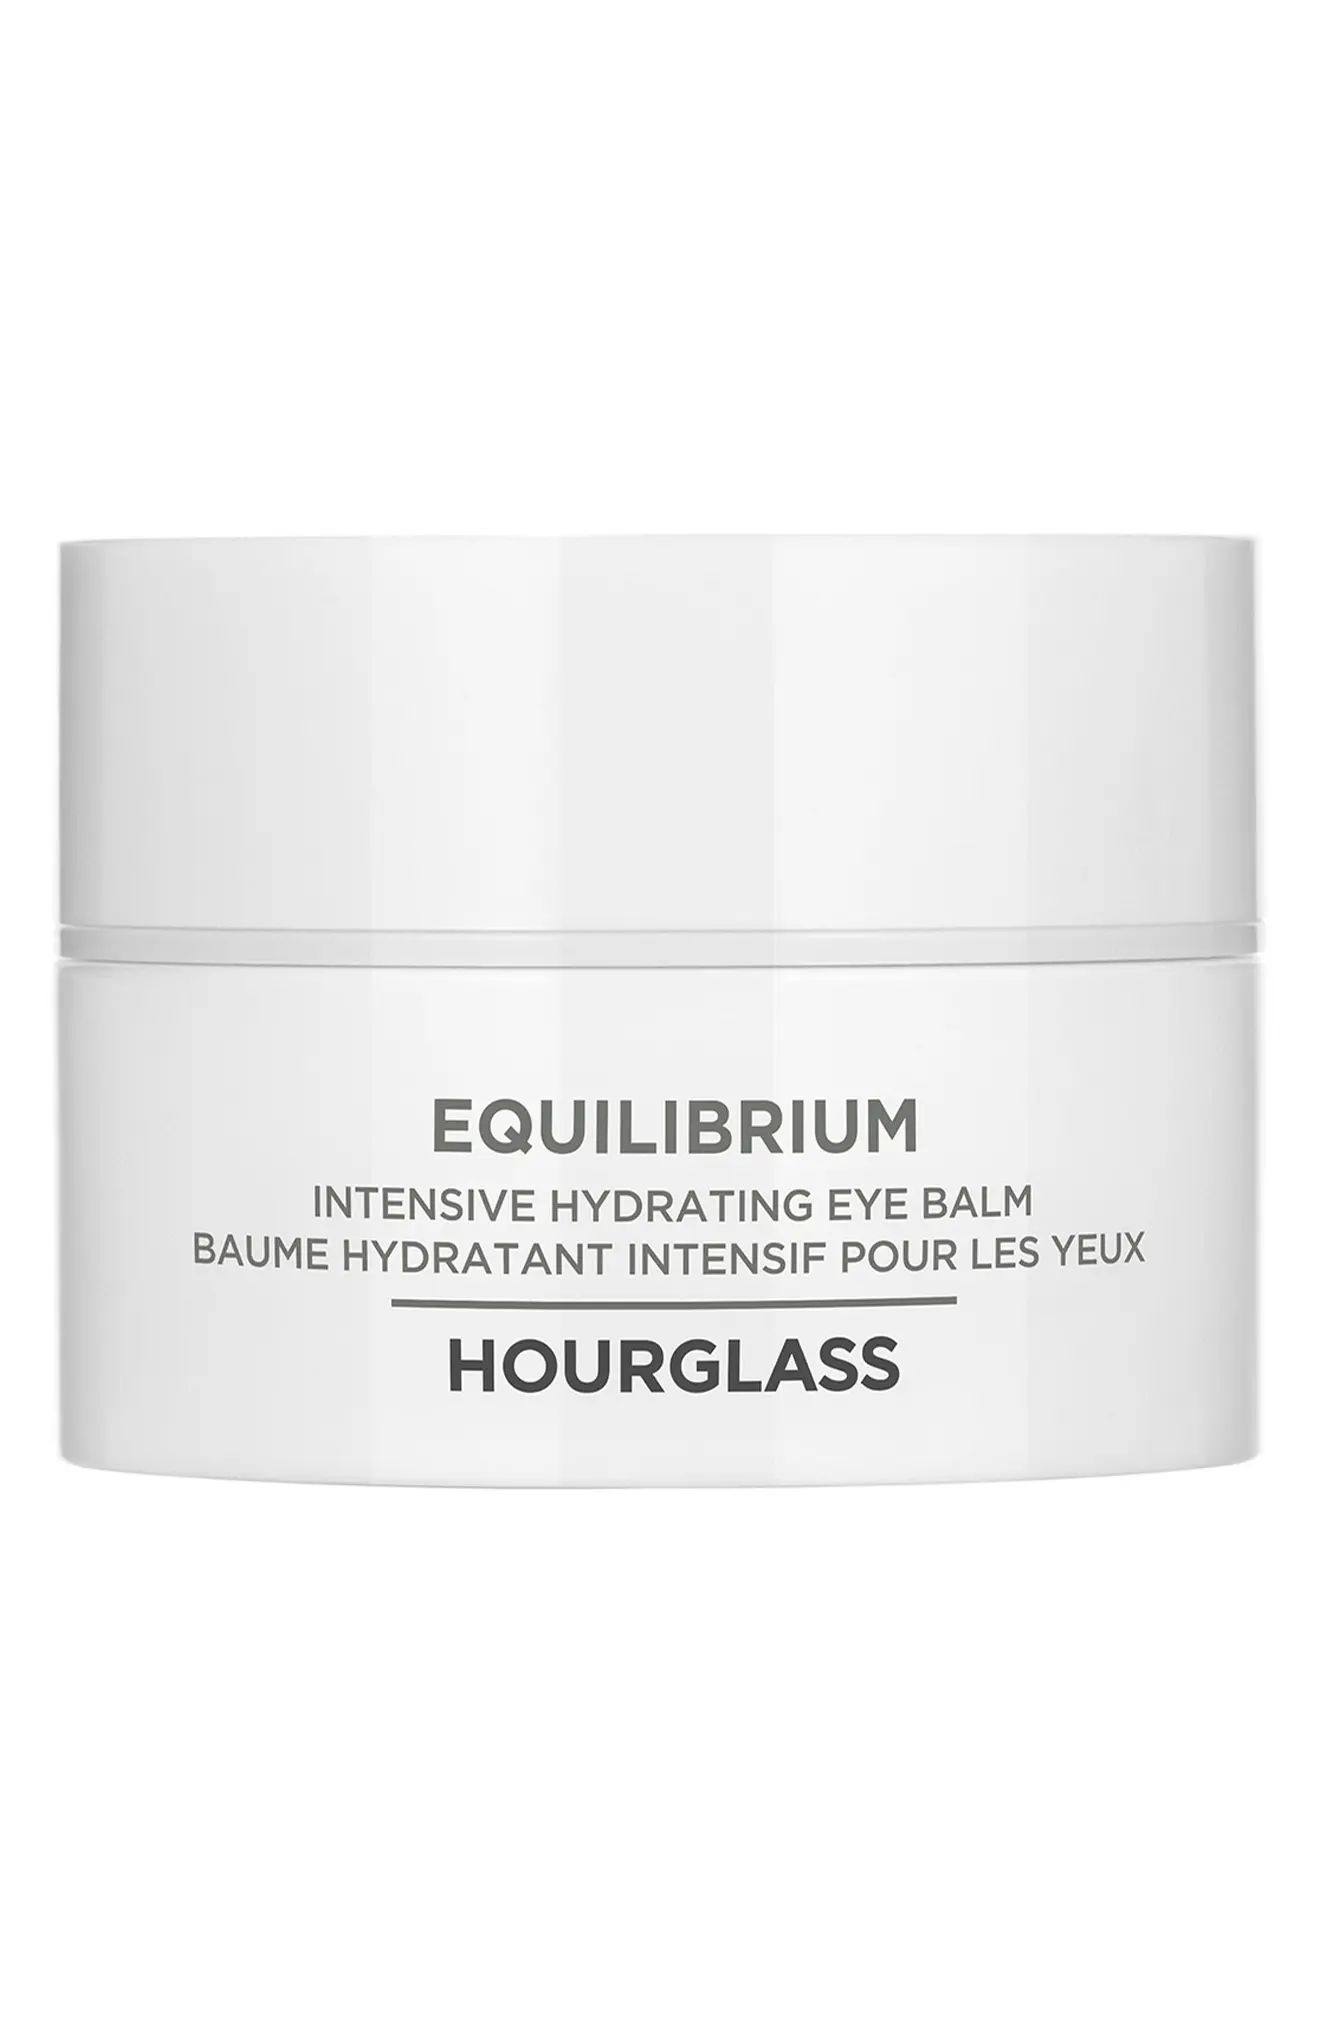 Hourglass Equilibrium Intensive Hydrating Eye Balm (Nordstrom Exclusive) | Nordstrom